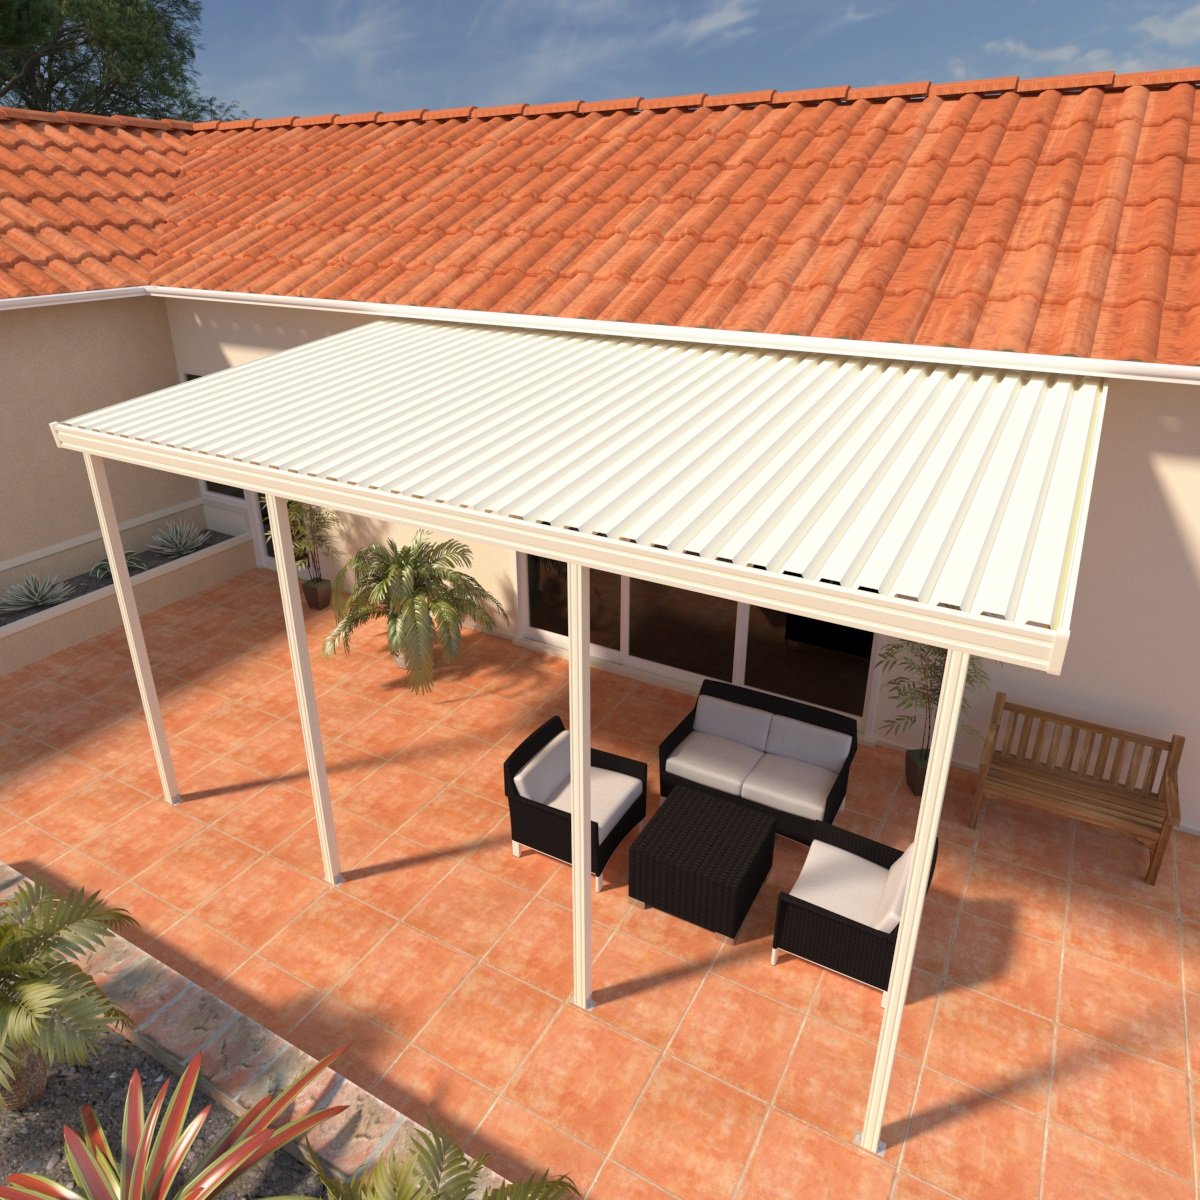 10 ft. Deep x 20 ft. Wide Ivory Attached Aluminum Patio Cover -4 Posts - (30lb Medium/High Snow Area)